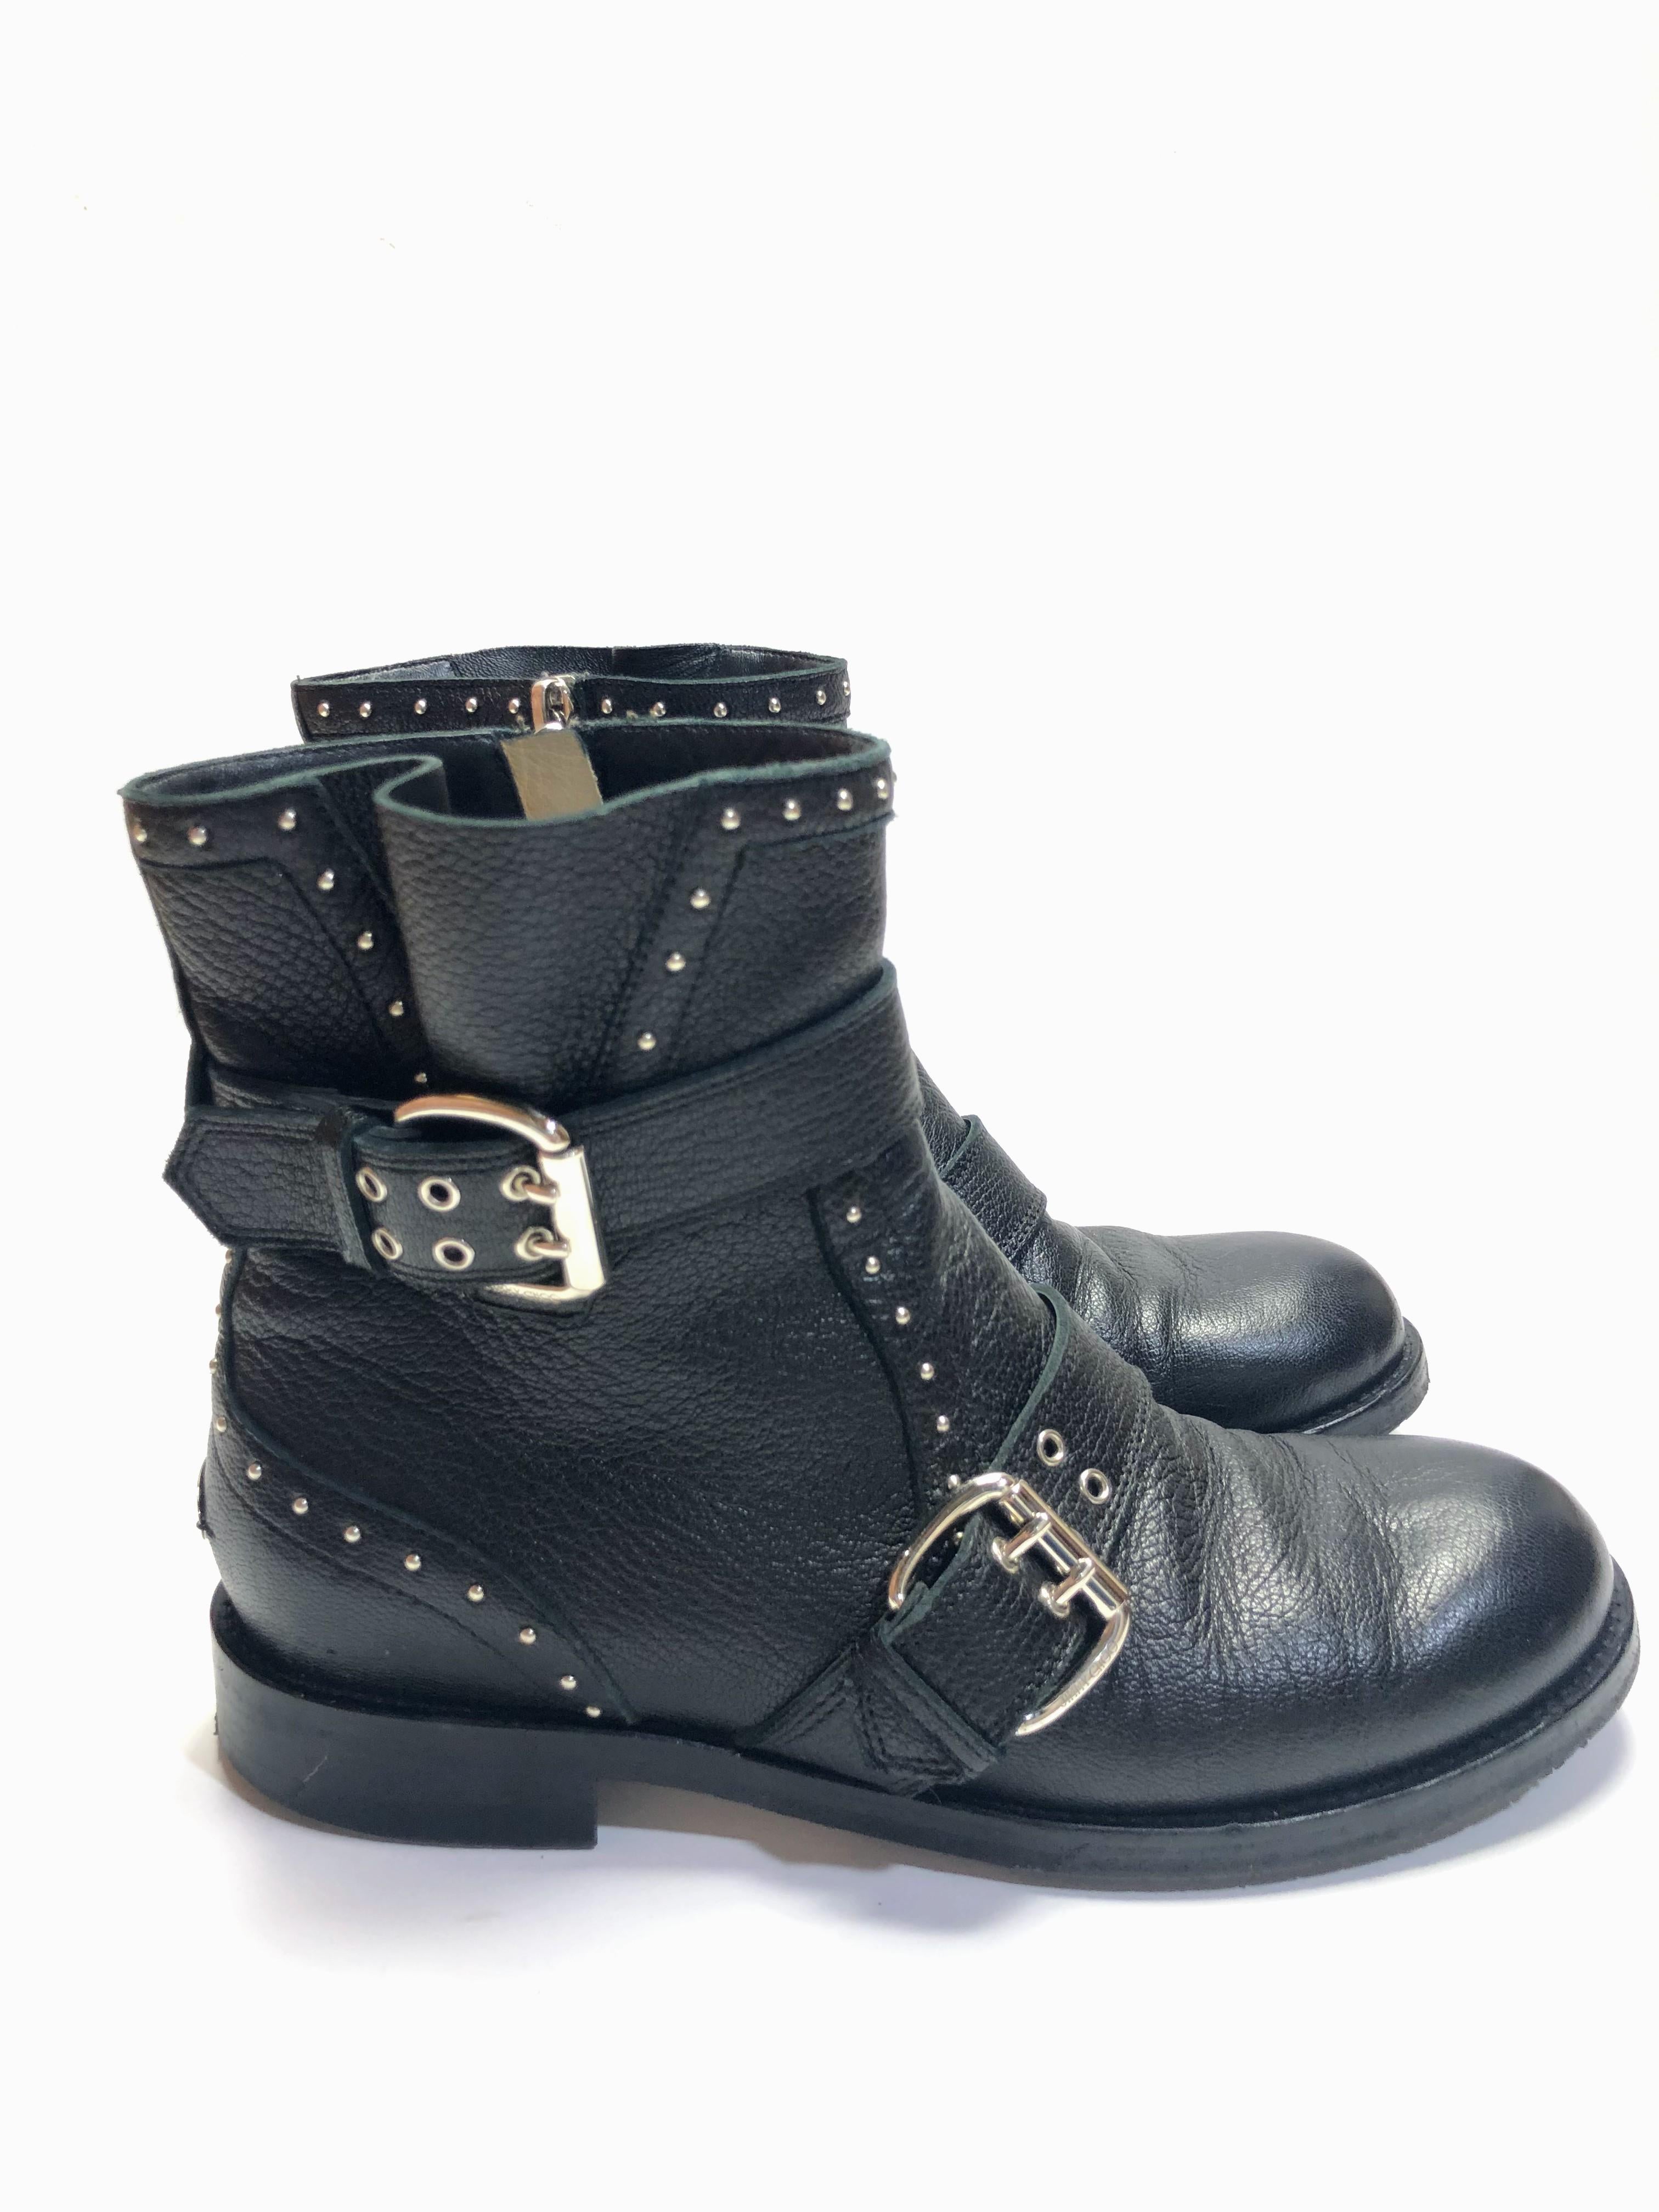 Women's or Men's Jimmy Choo Silver Studded Ankle Boots